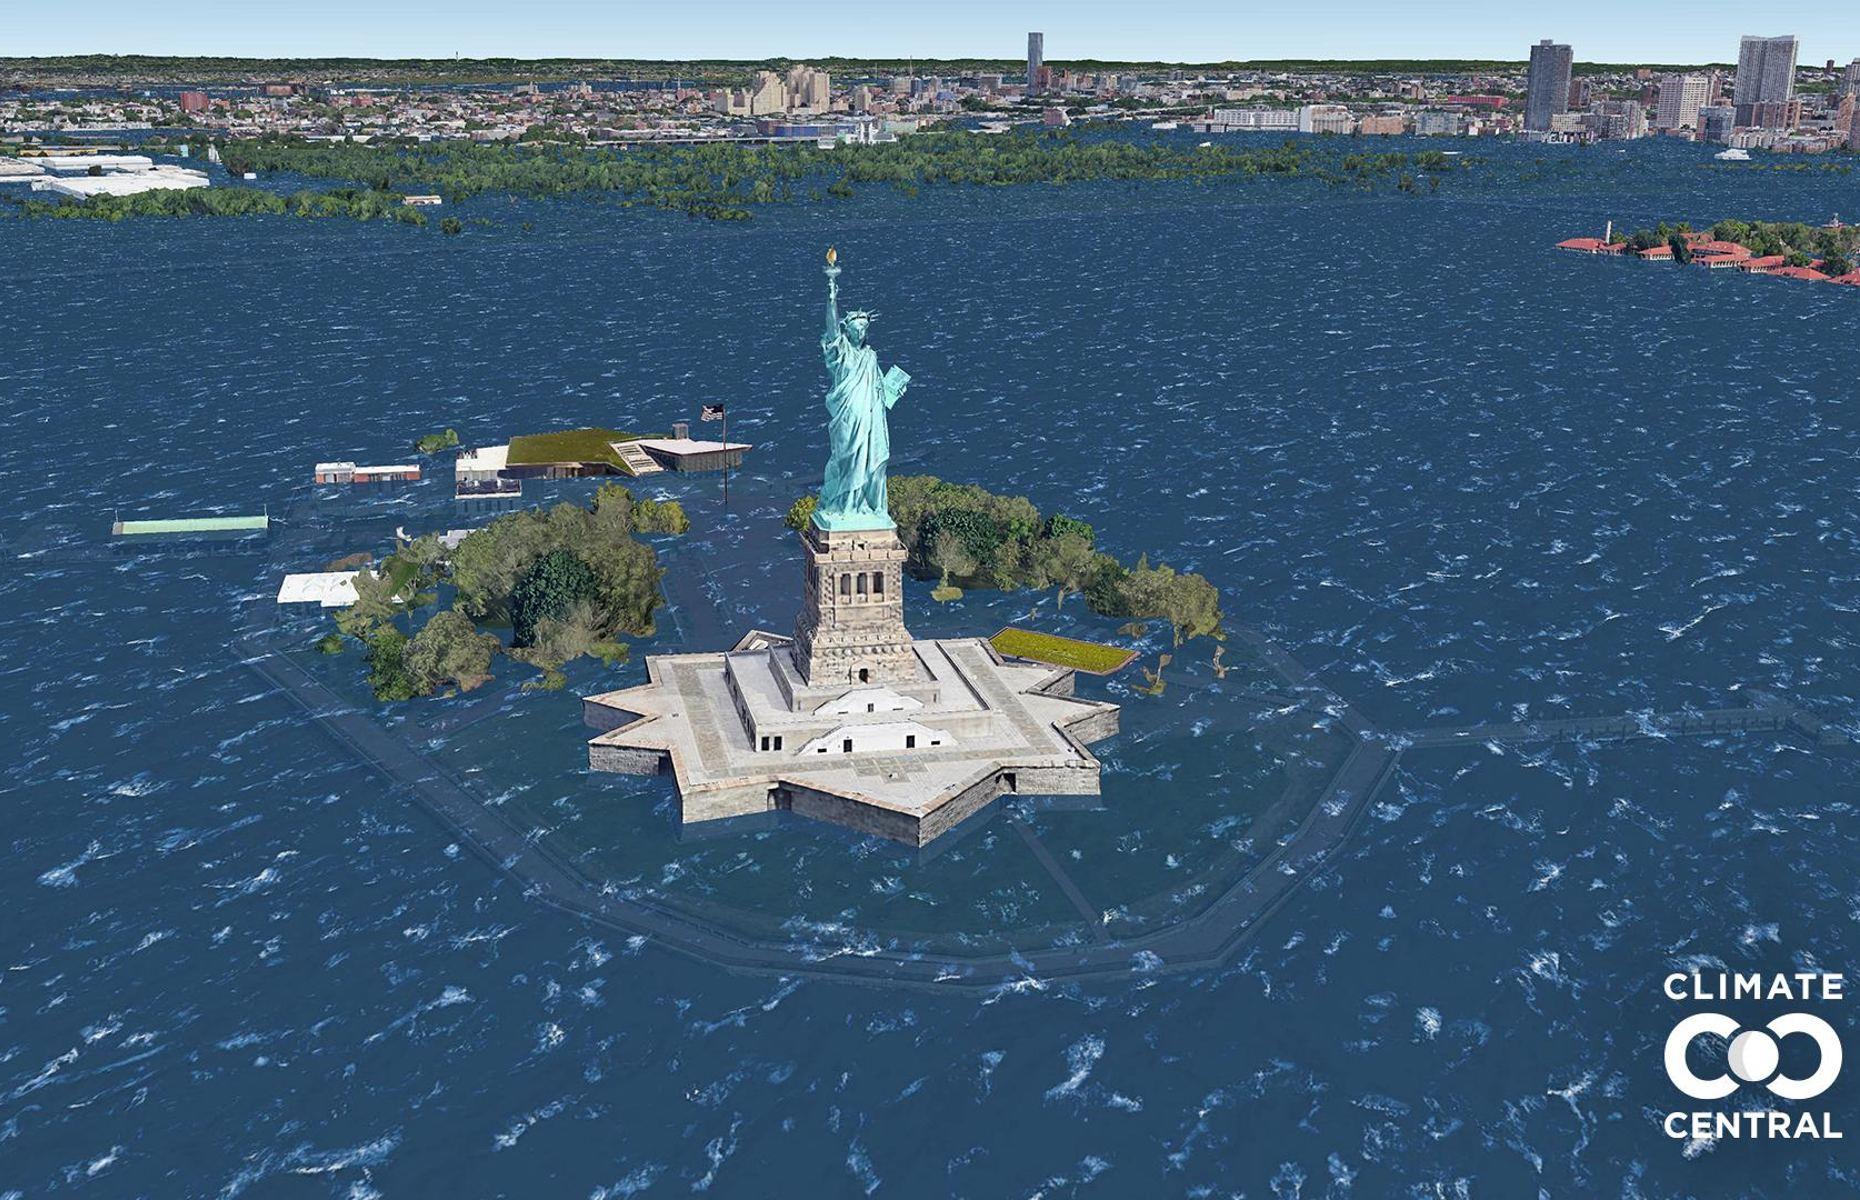 <p>Built to commemorate America's centennial anniversary of independence, the Statue of Liberty has stood over New York Bay for more than 130 years. As you can see here, however, its star-shaped base and the island on which it stands would be mostly submerged due to the climate crisis.</p>  <p><strong><a href="https://www.loveexploring.com/galleries/92886/incredible-images-that-show-the-true-impact-of-climate-change">Now read on for more shocking images that show the true impact of climate change today</a></strong></p>